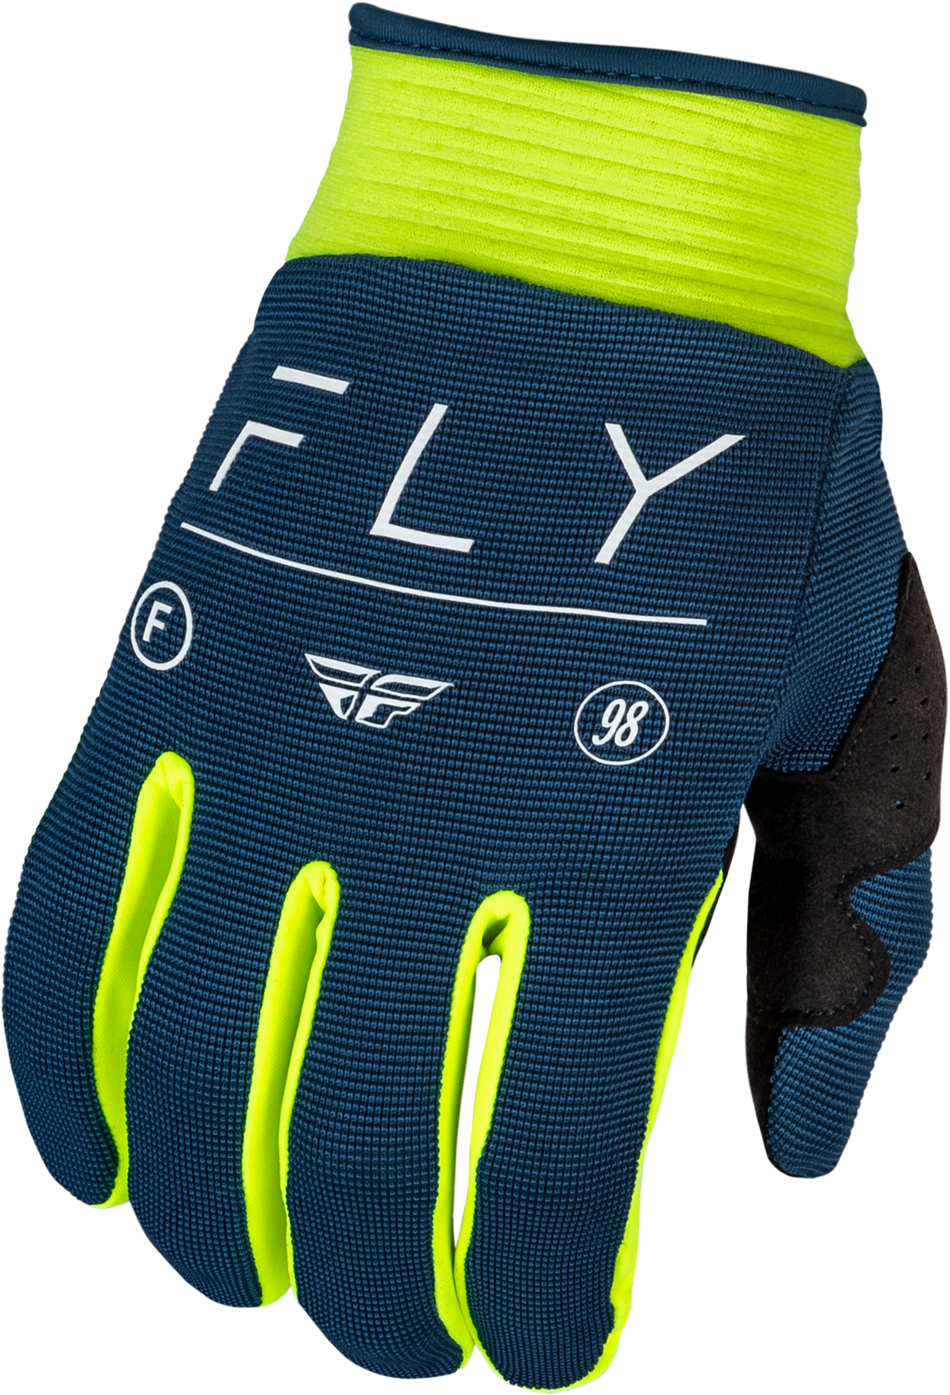 FLY RACING Youth F-16 Gloves Navy/Hi-Vis/White Y3xs 377-912Y3XS